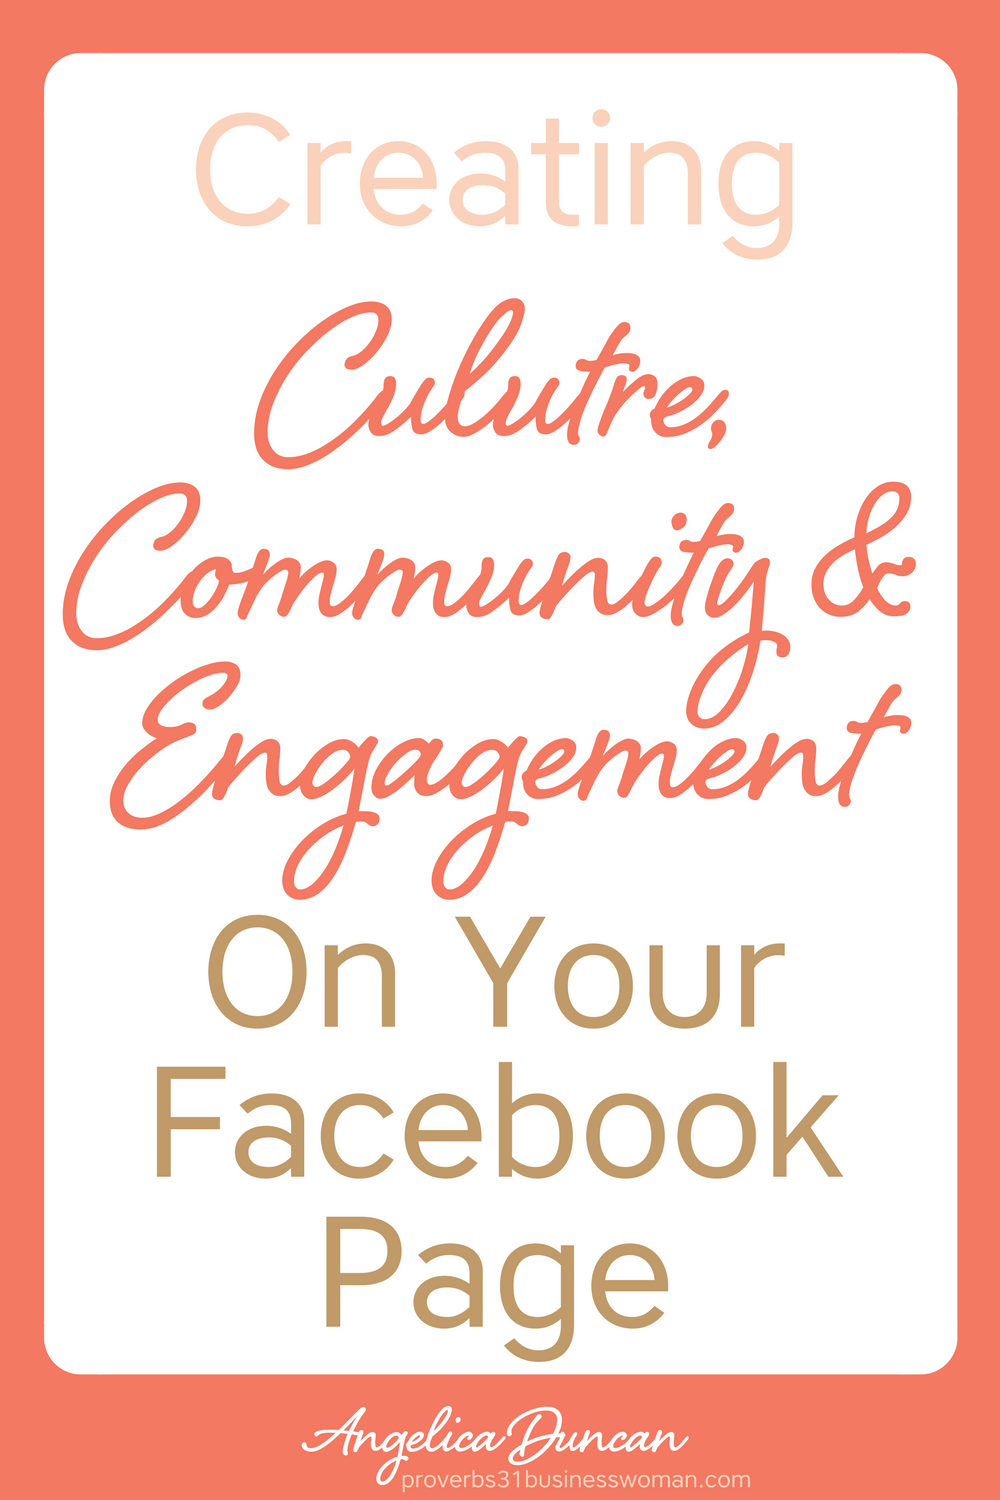 Want to beat the Facebook Algorithm? You can! Just by creating culture, community, and engagement on your Facebook page. It works everytime! Learn how NOW! #facebook #mompreneur #onlinebusiness #wahm #womeninbusiness #christianbusiness #christianwomeninbusiness #christianentrepreneurs #proverbs31 #proverbs31woman #proverbs31businesswoman #proverbs31enrepreneur #p31 #angelicaduncan #silkoversteel #sos